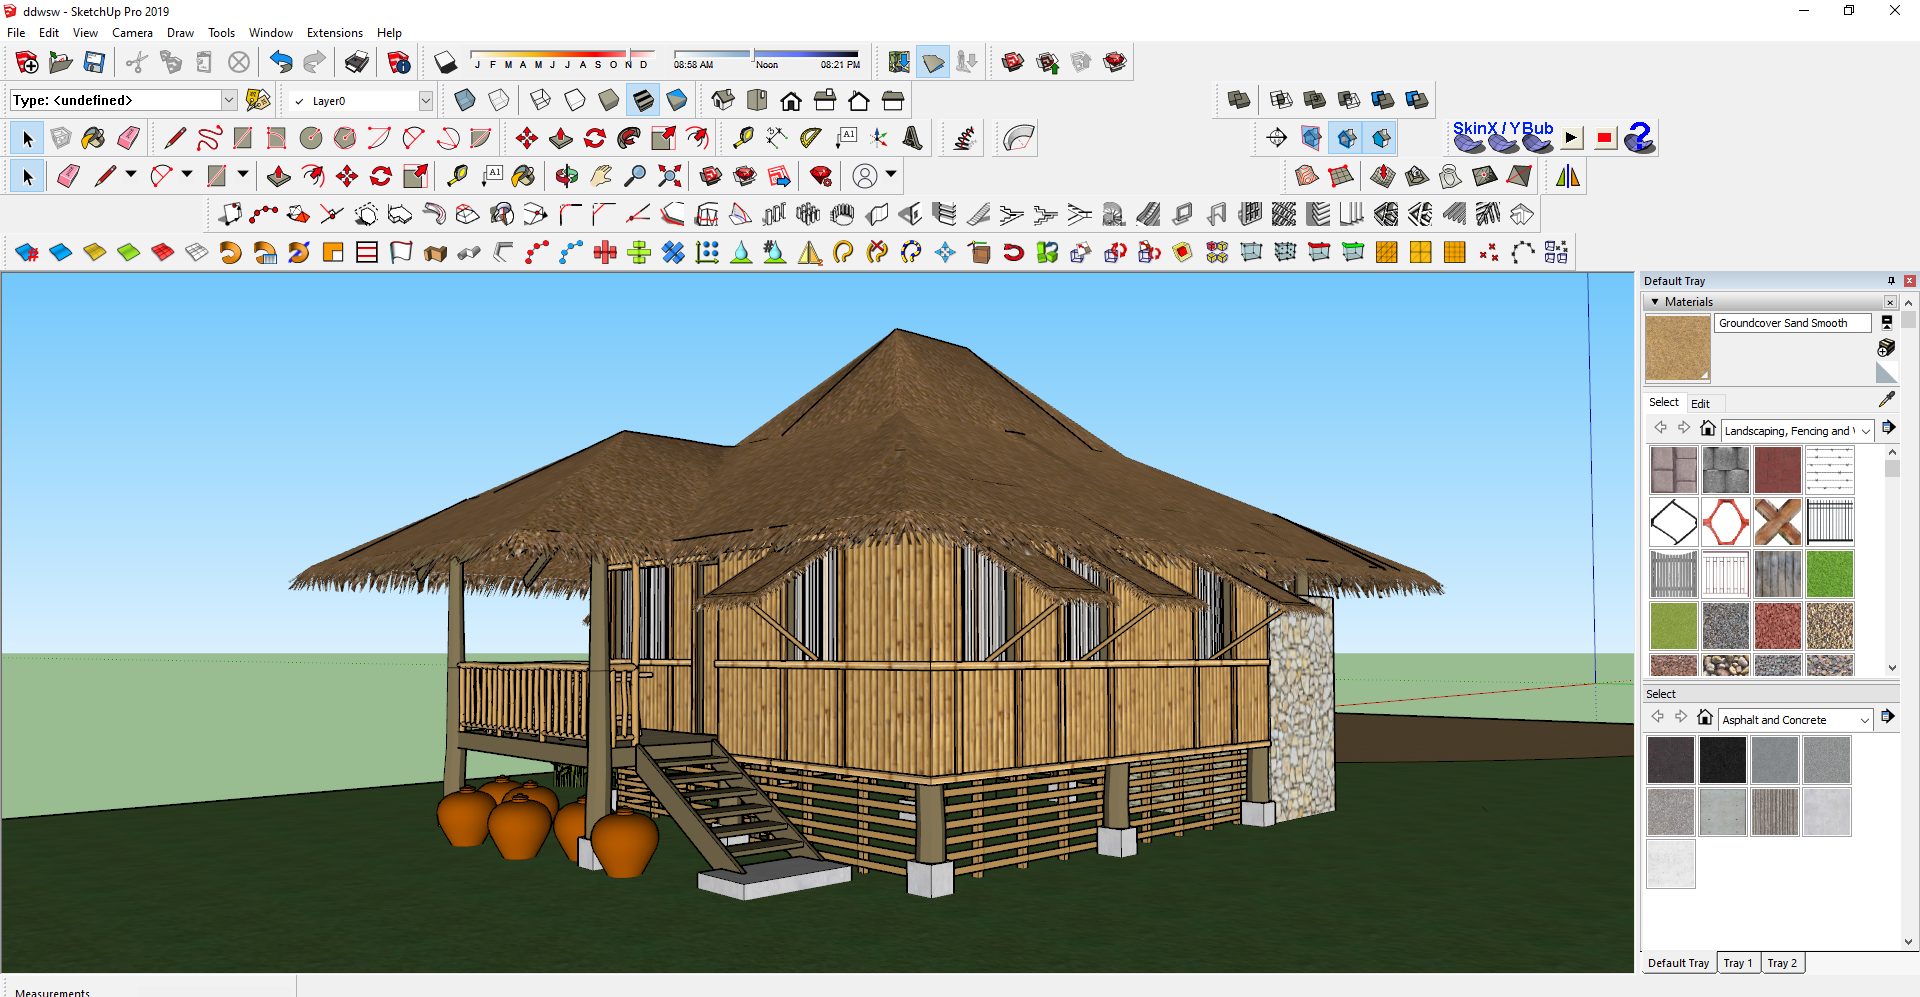 ddwsw - SketchUp Pro 2019 9_14_2021 1_15_02 AM.png